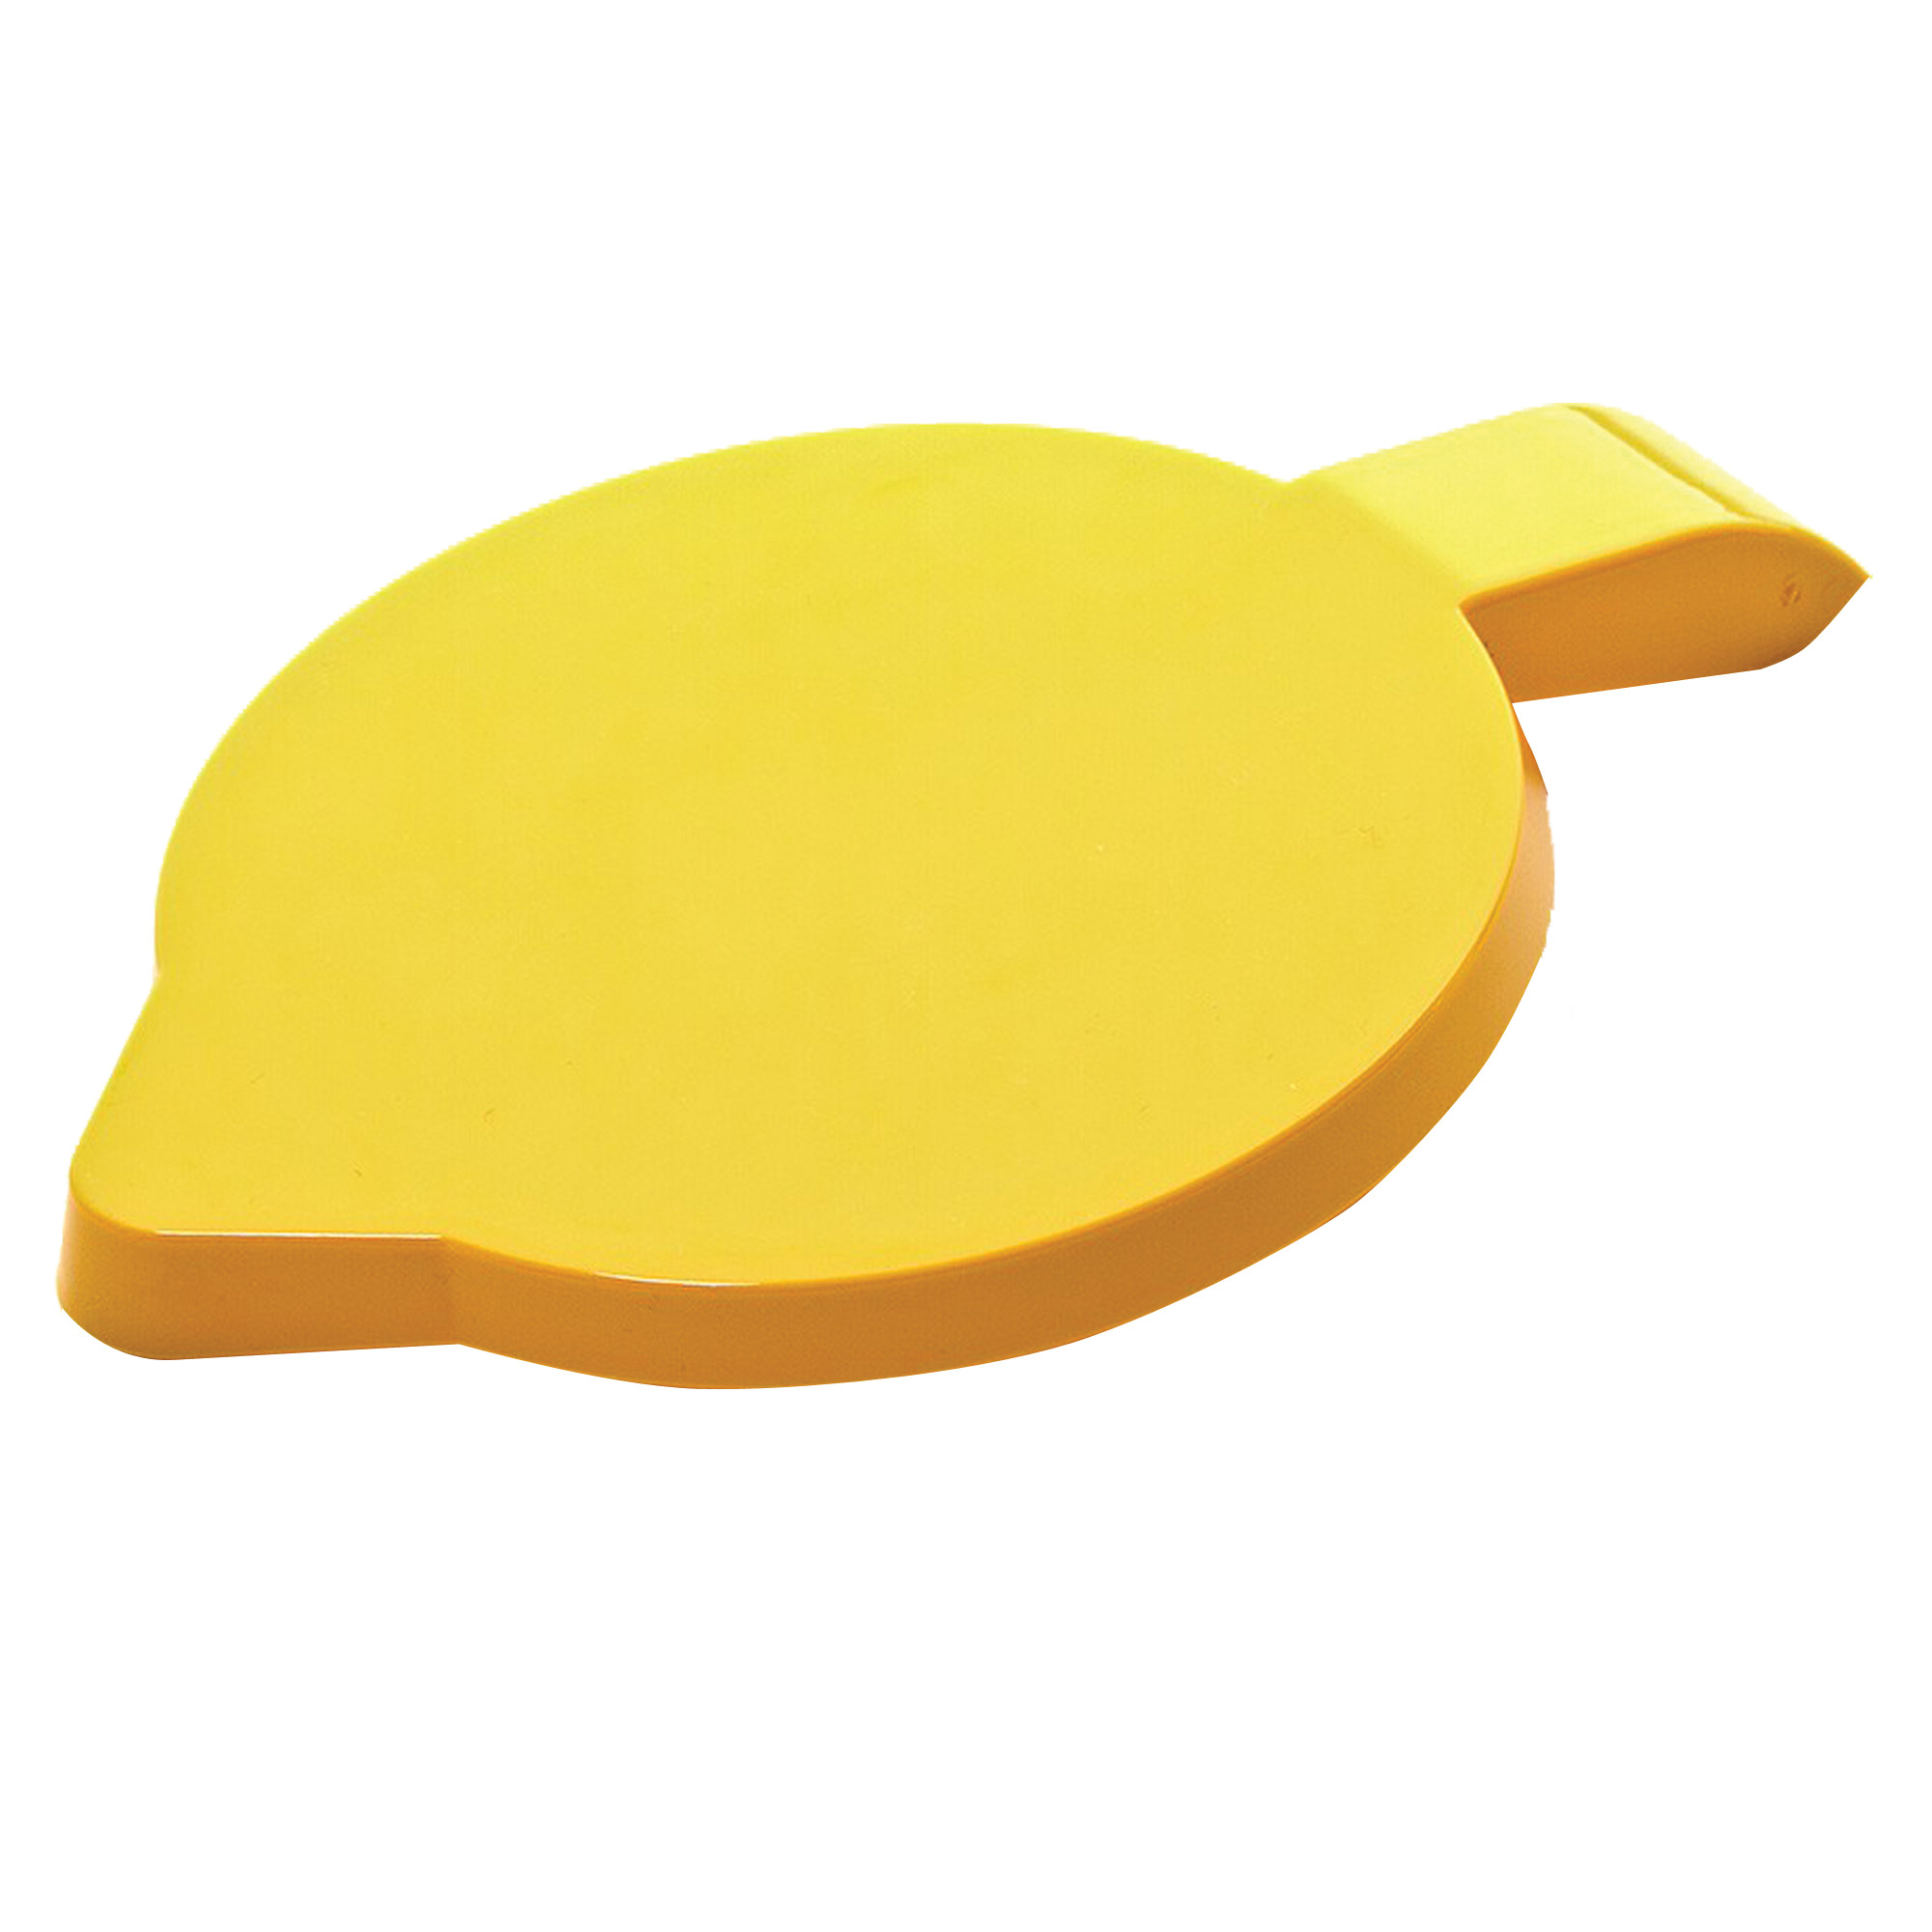 Polycarbonate Lid for CB-8106 - YELLOW - EACH